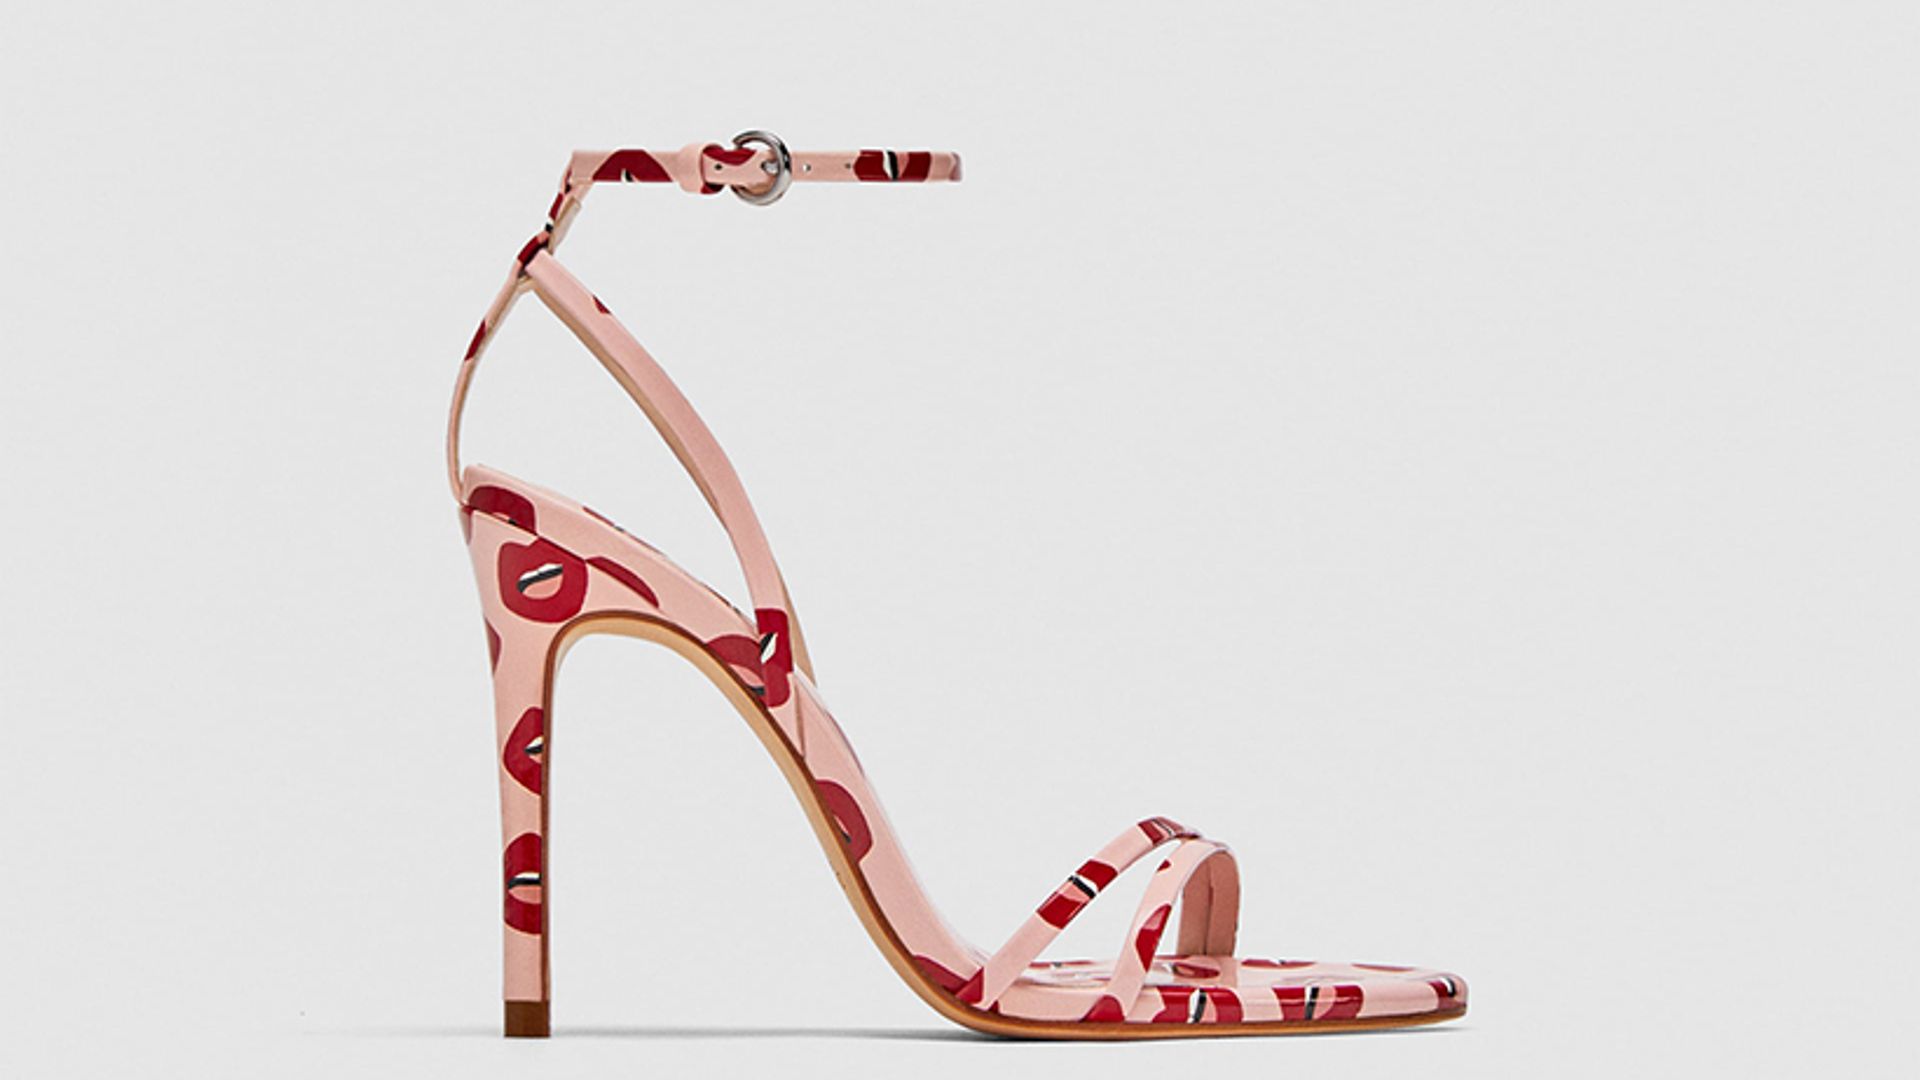 HFM's Tuesday Shoesday! Get lippy with ZARA's fun high-heel sandals